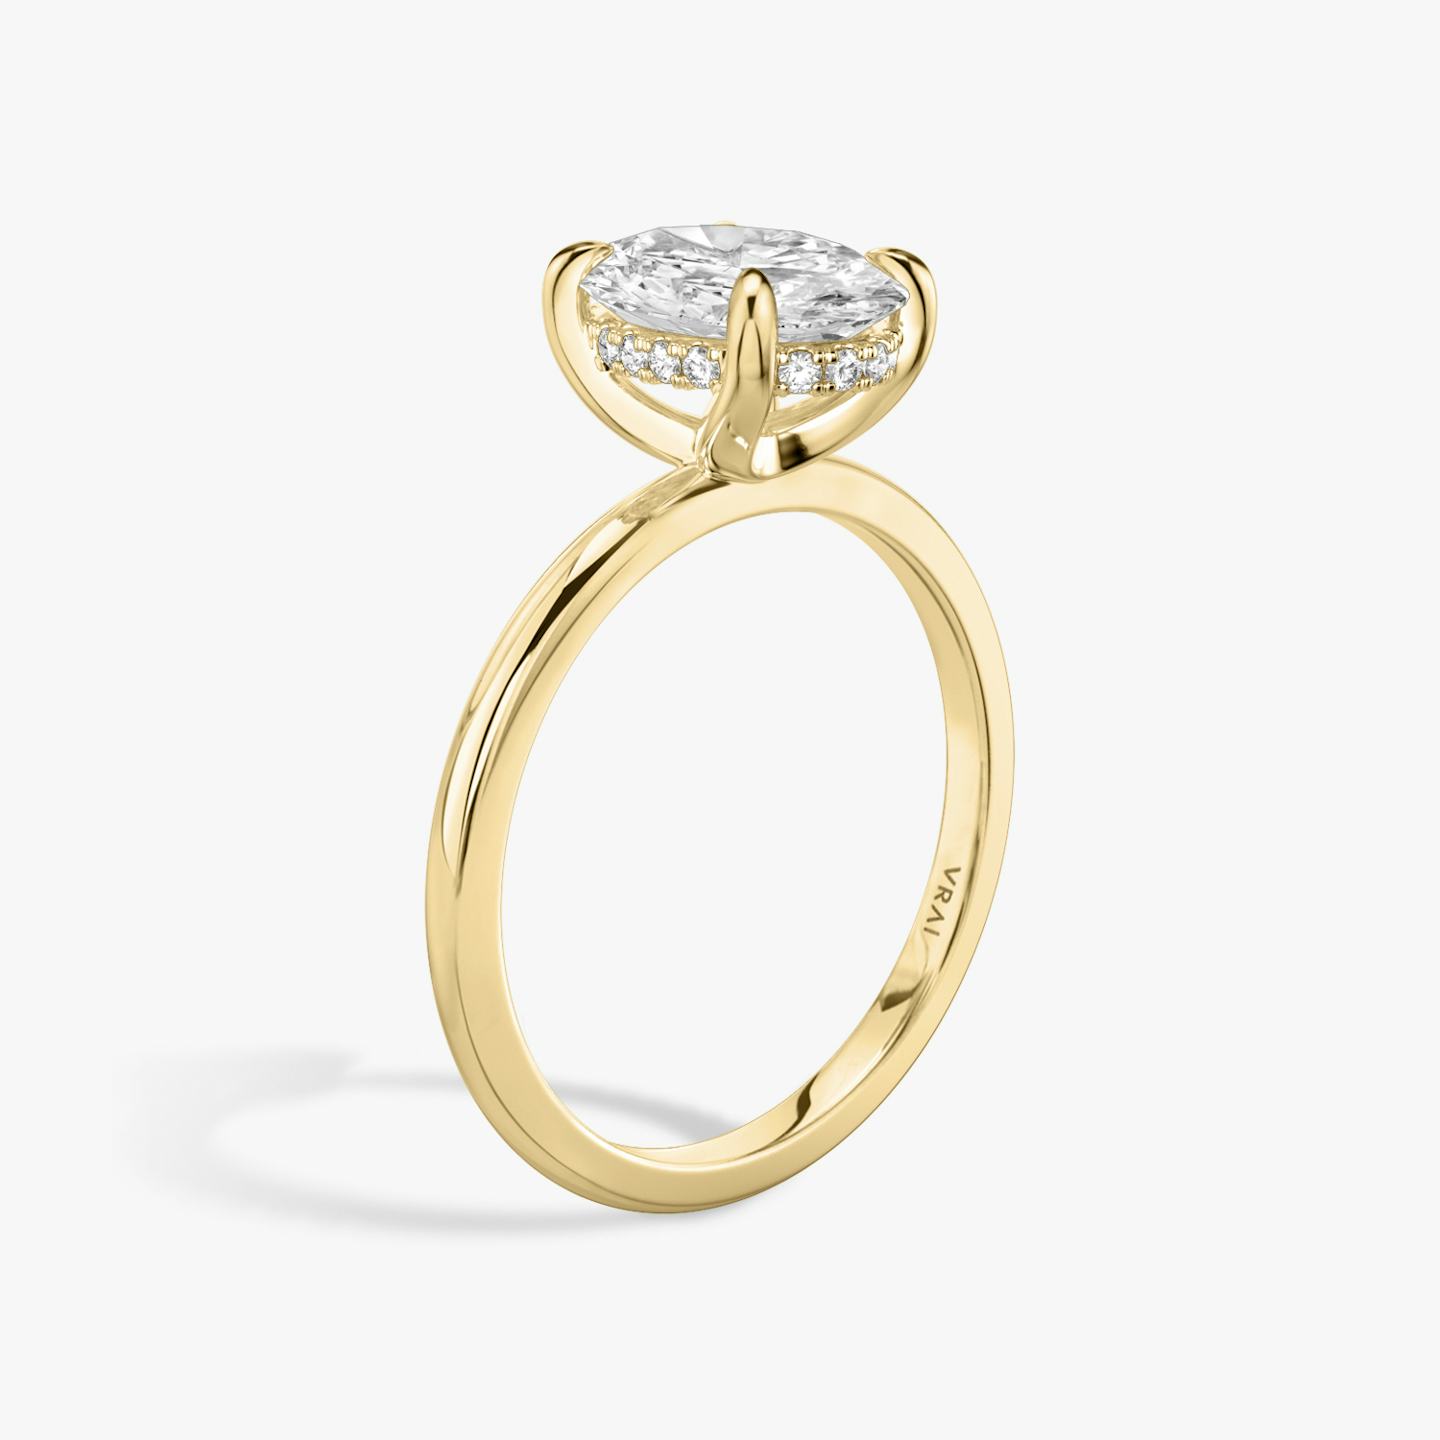 Hidden Halo oval yellow gold engagement ring